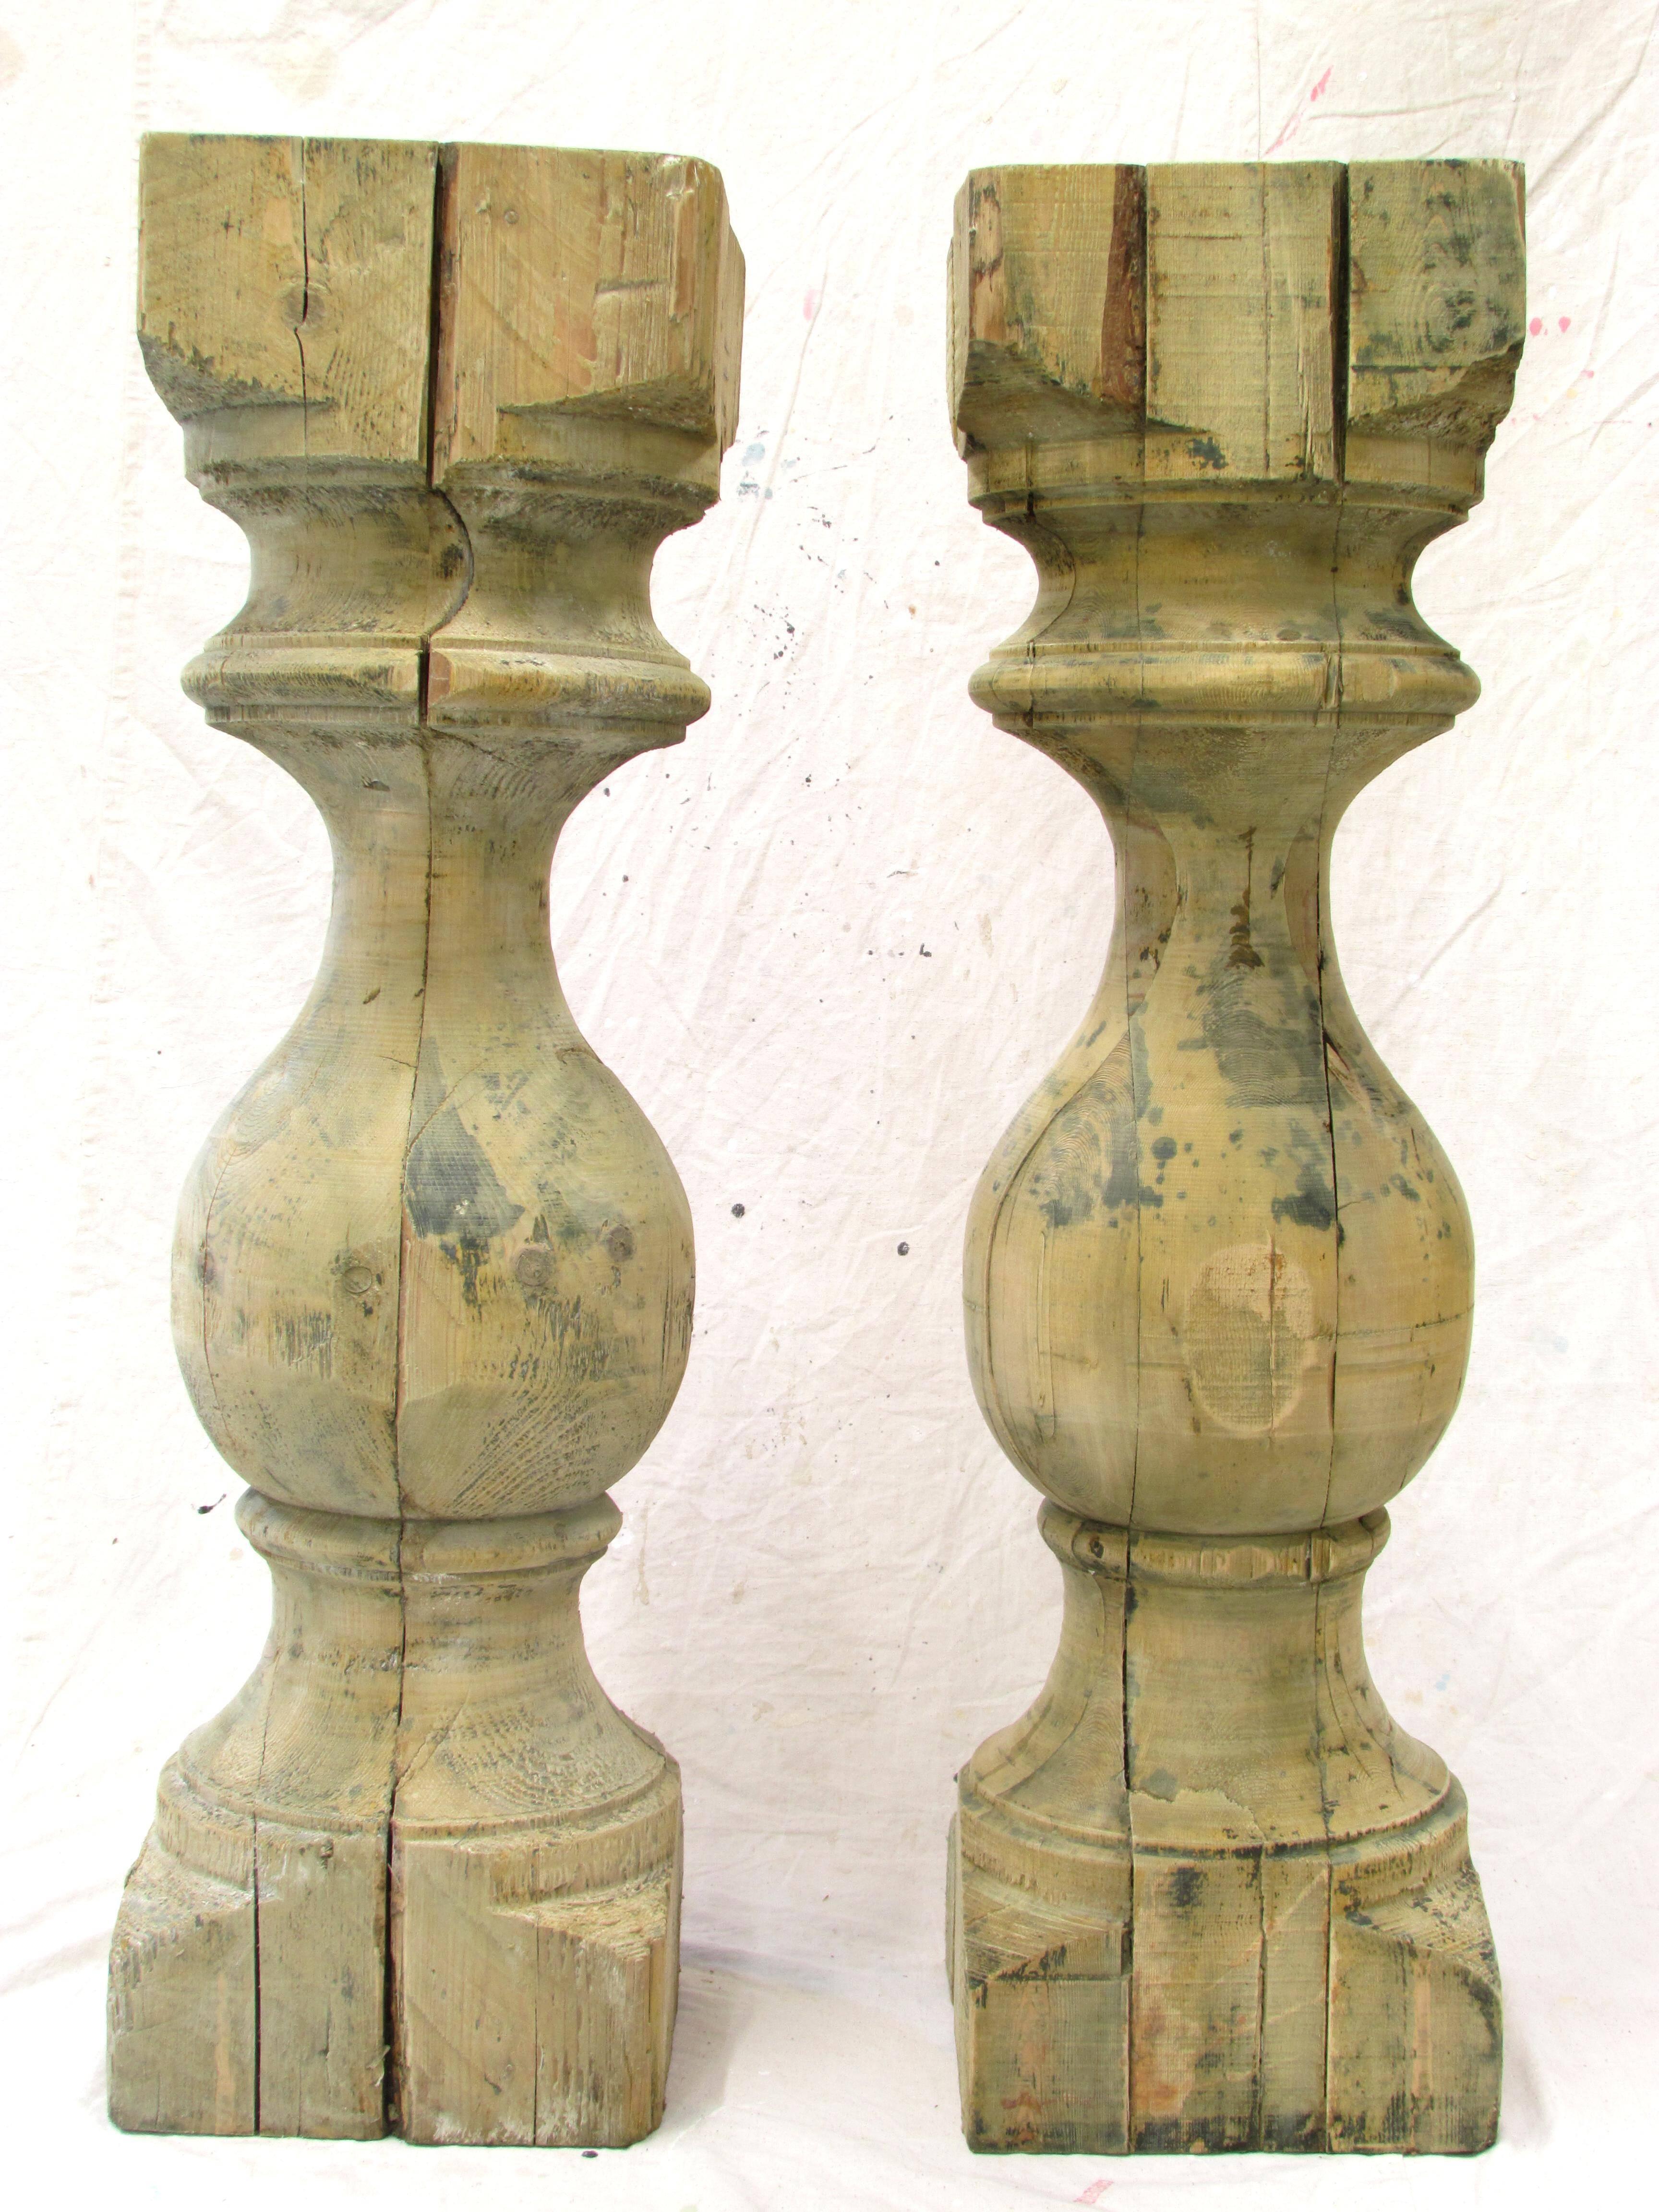 Two large-scale turned stripped pine wooden baluster could be used as pedestals